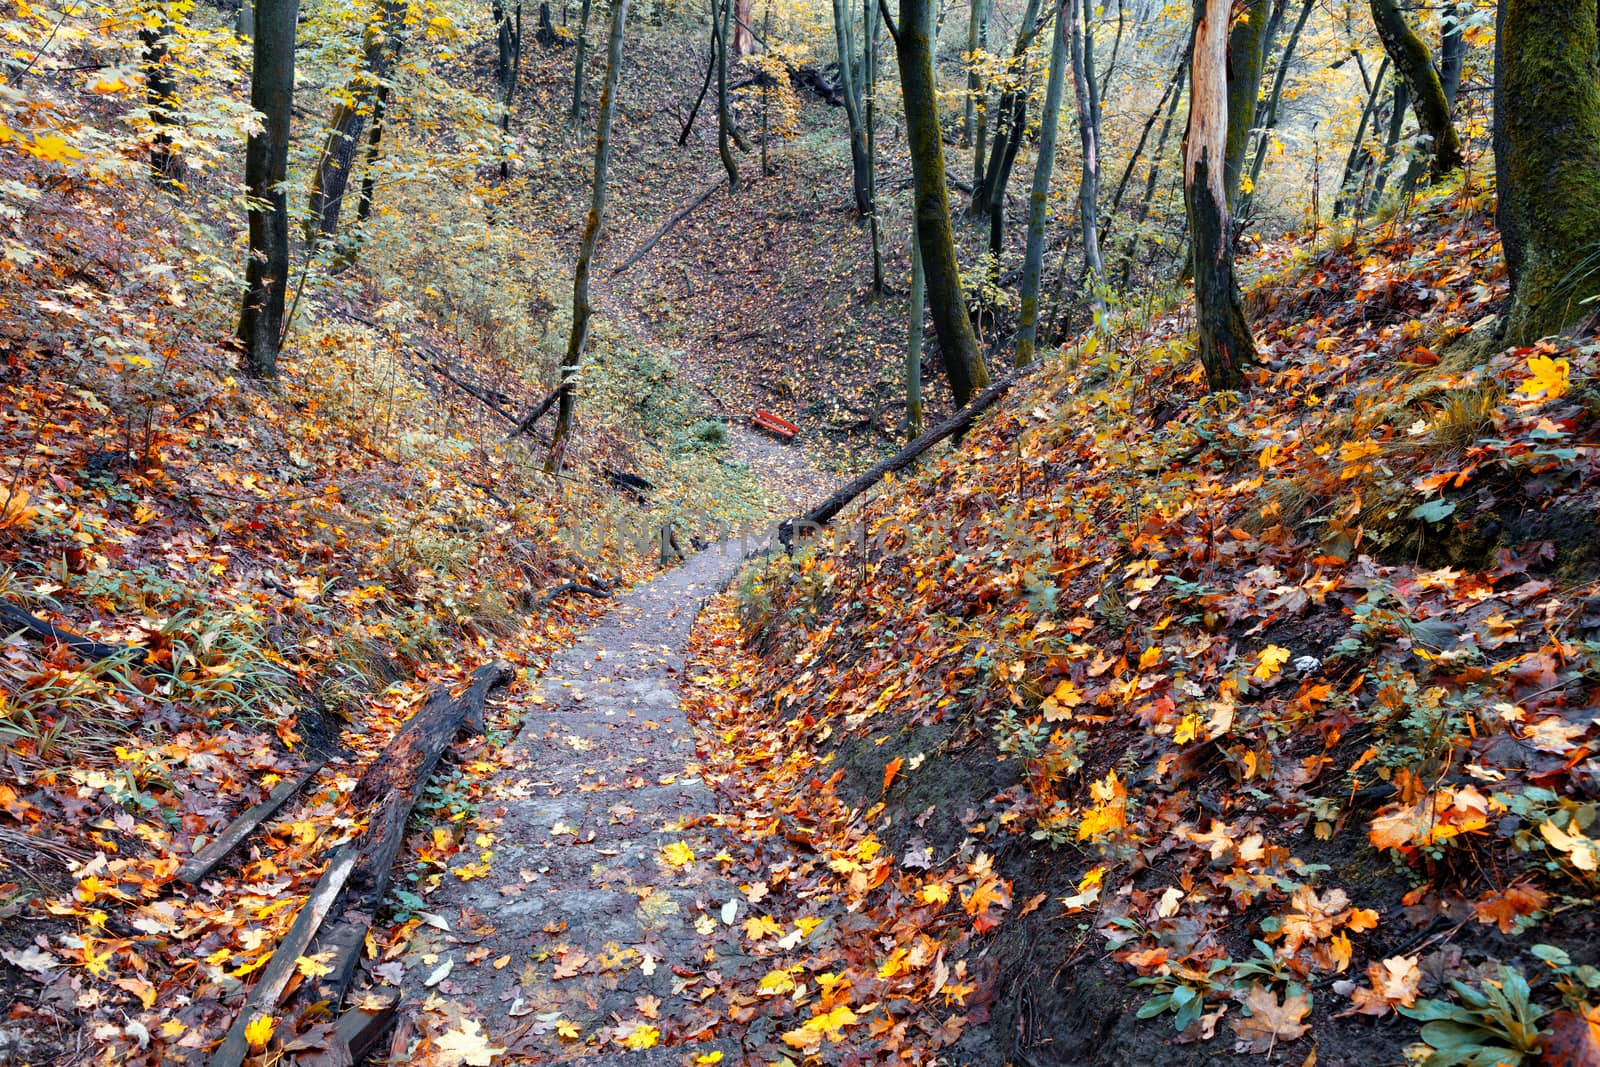 Autumn forest. An old stone trail, strewn with fallen leaves, descends from the hill.